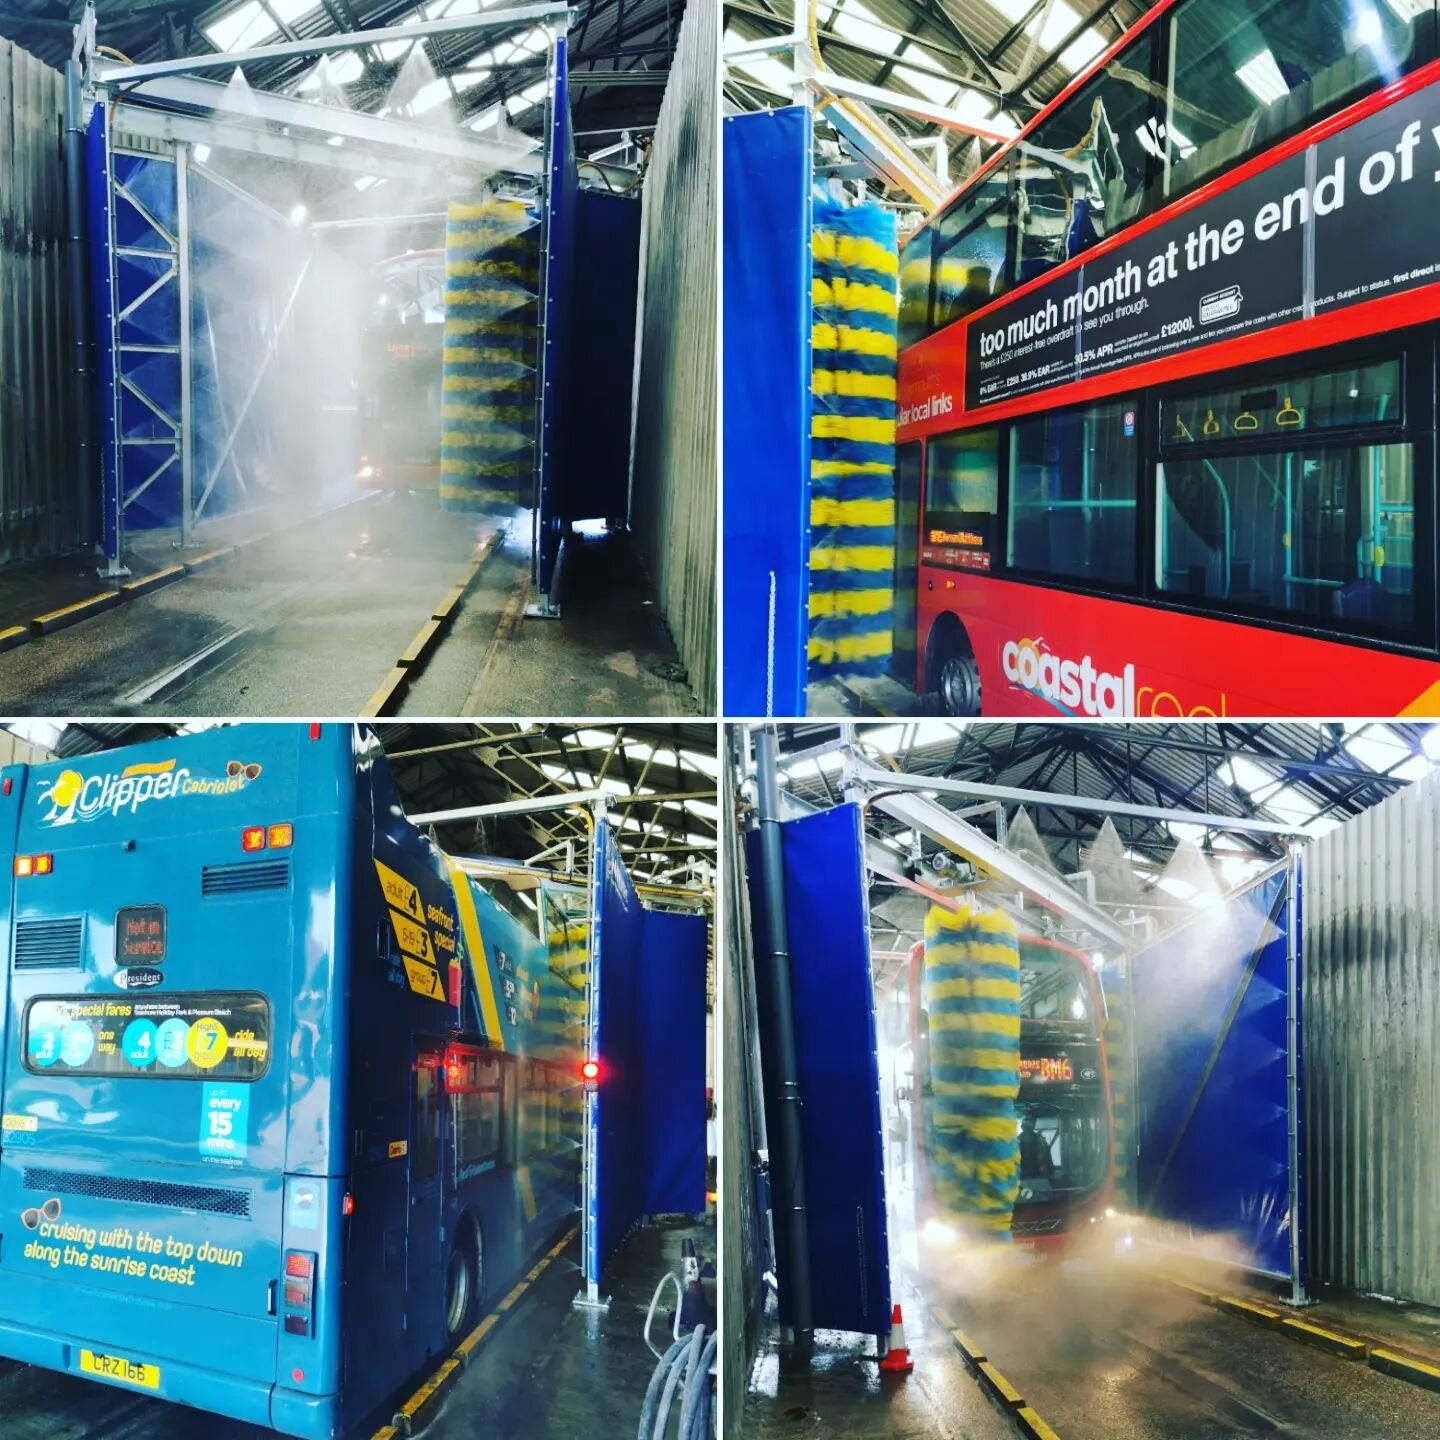 Another great WNV DF2020 Drive Through Bus Wash installation complete for&nbsp;FirstGroup plc&nbsp;at First Bus Great Yarmouth depot.&nbsp;#buswash&nbsp;#wnv&nbsp;#bus&nbsp;#wnvsystems&nbsp;#drivethrough&nbsp;#drivethr&nbsp;#firstgroup&nbsp;#firstyor